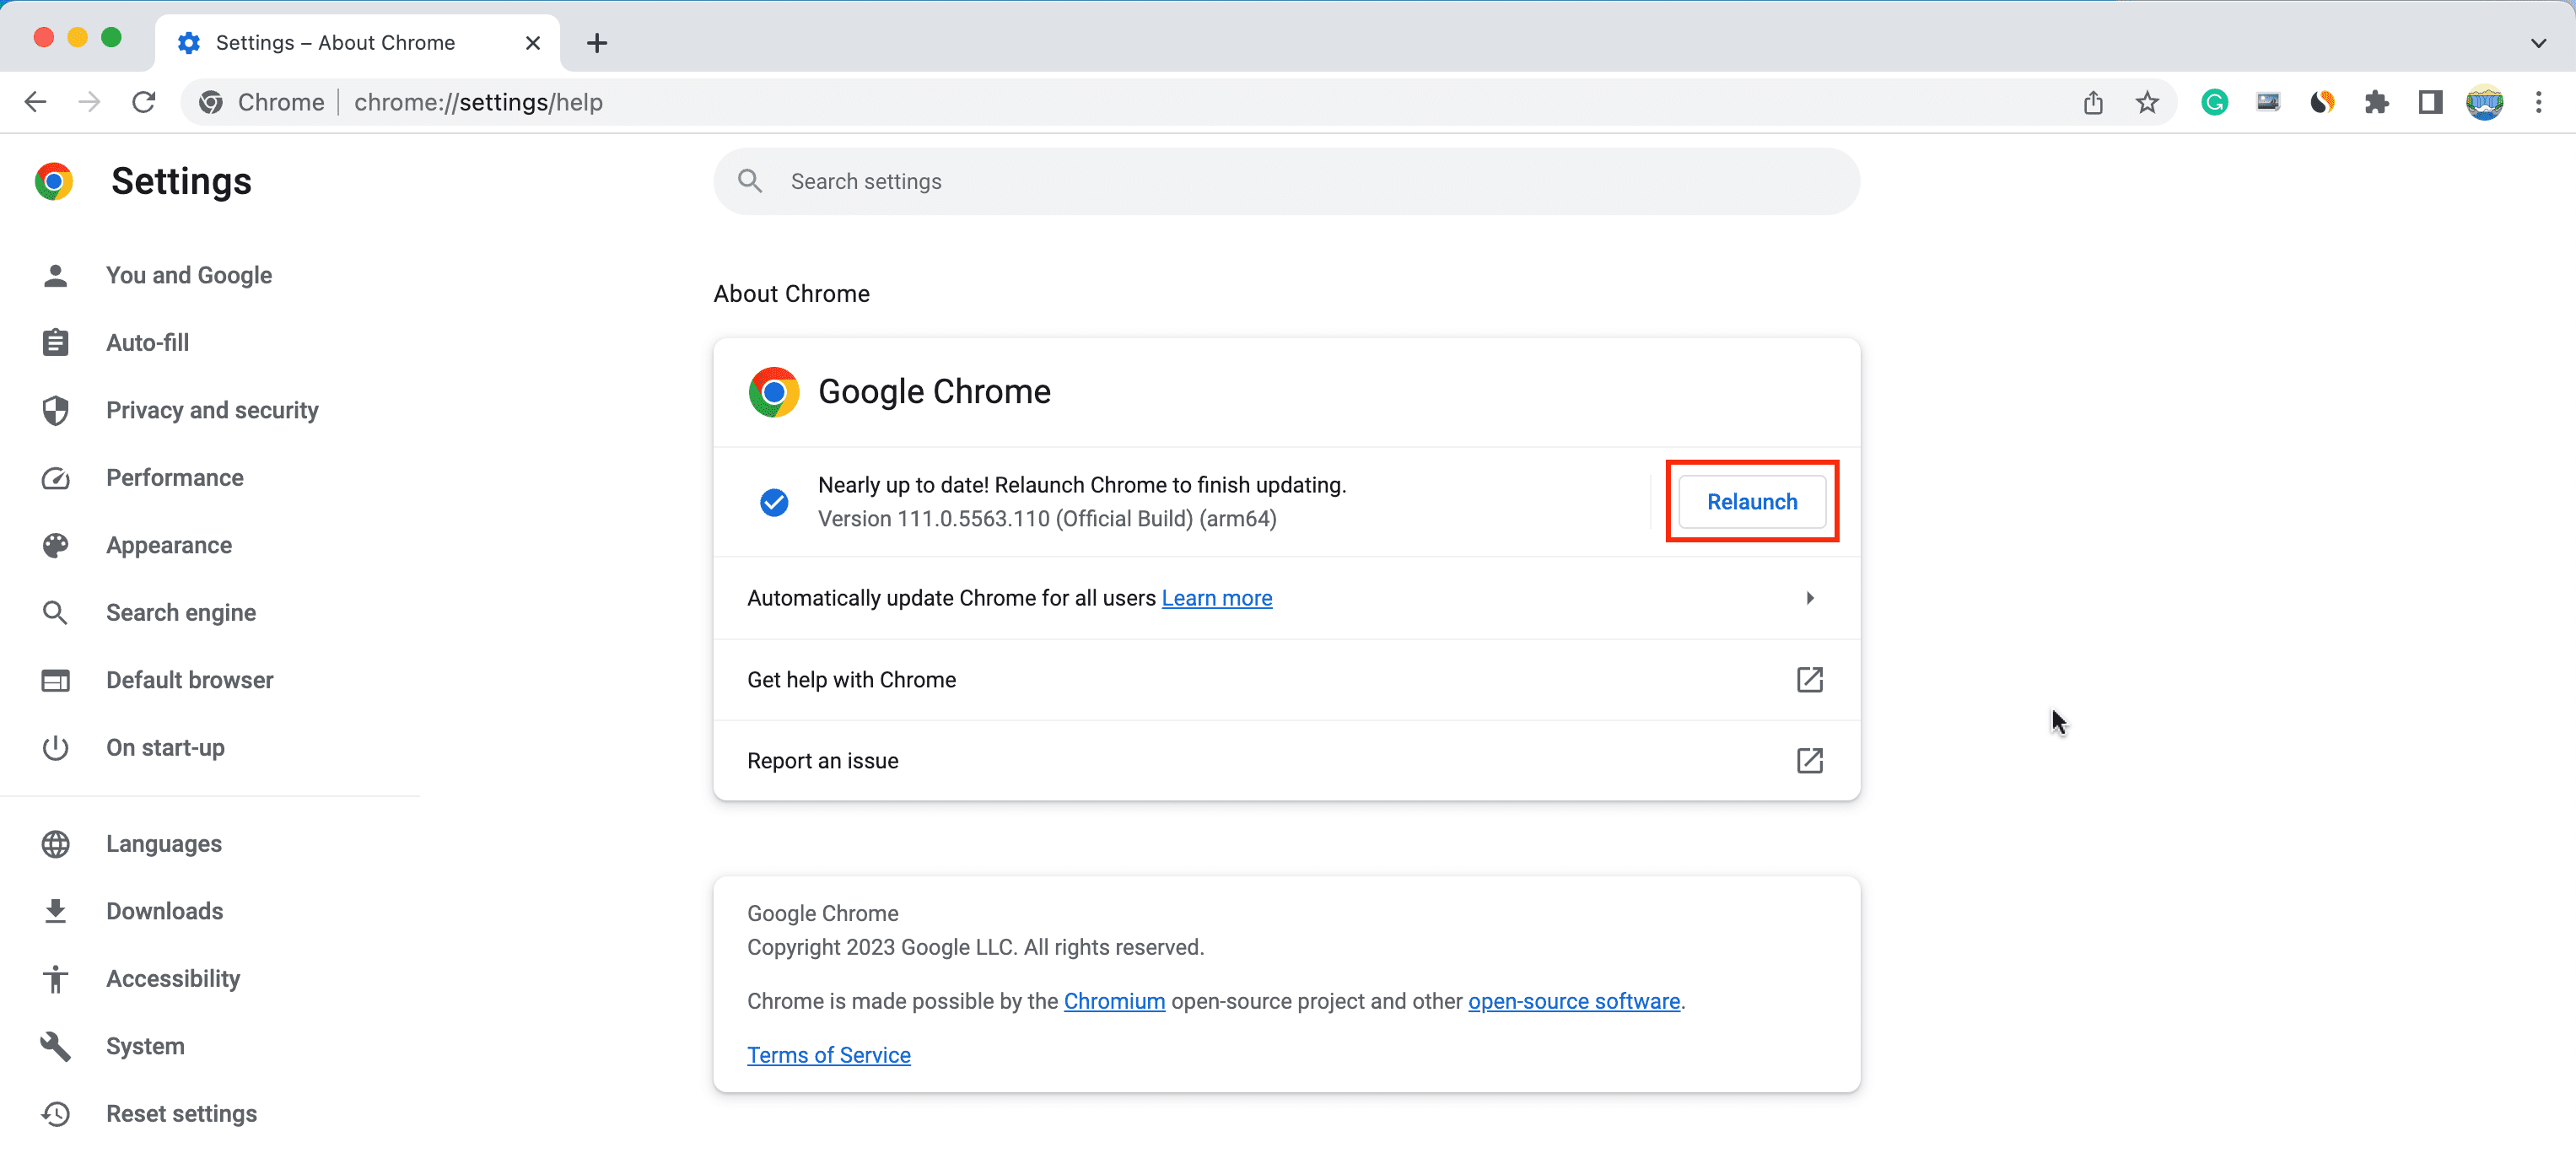 Relaunch Chrome on Mac to finish updating it